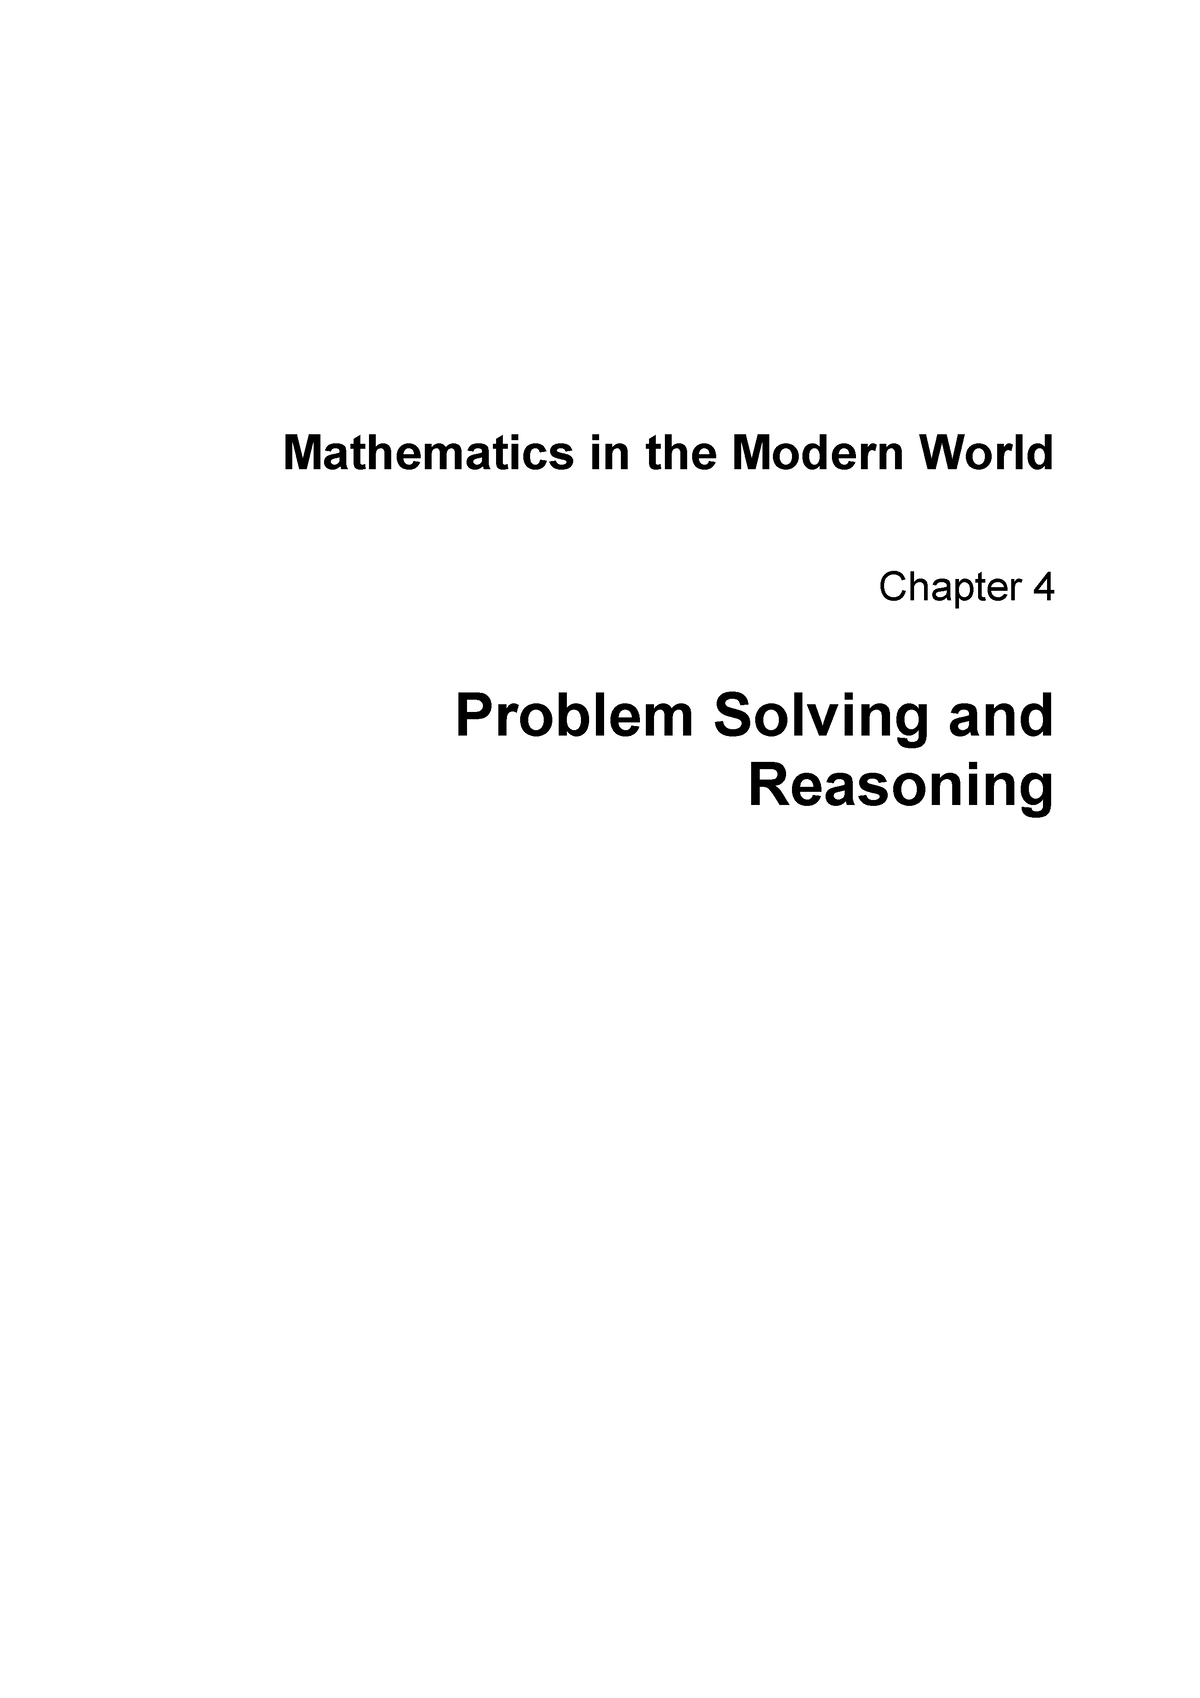 mathematics in the modern world problem solving and reasoning